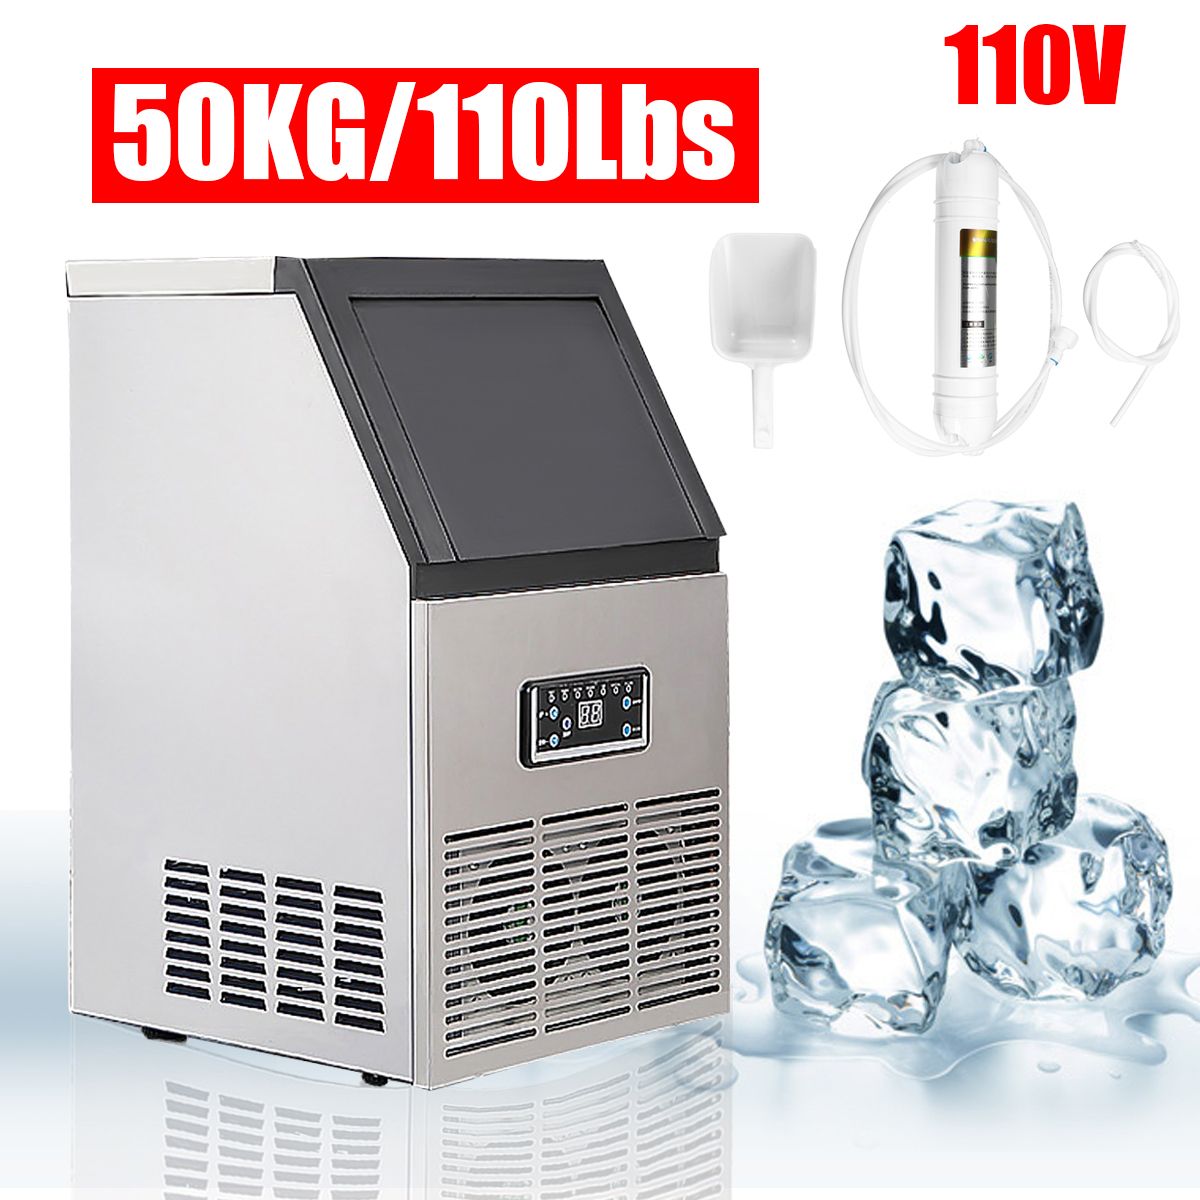 Automatic-Ice-Making-Machine-60-KG-Commercial-or-Household-for-Bar-Coffee-Milk-Tea-Shop-Electric-Cub-978581